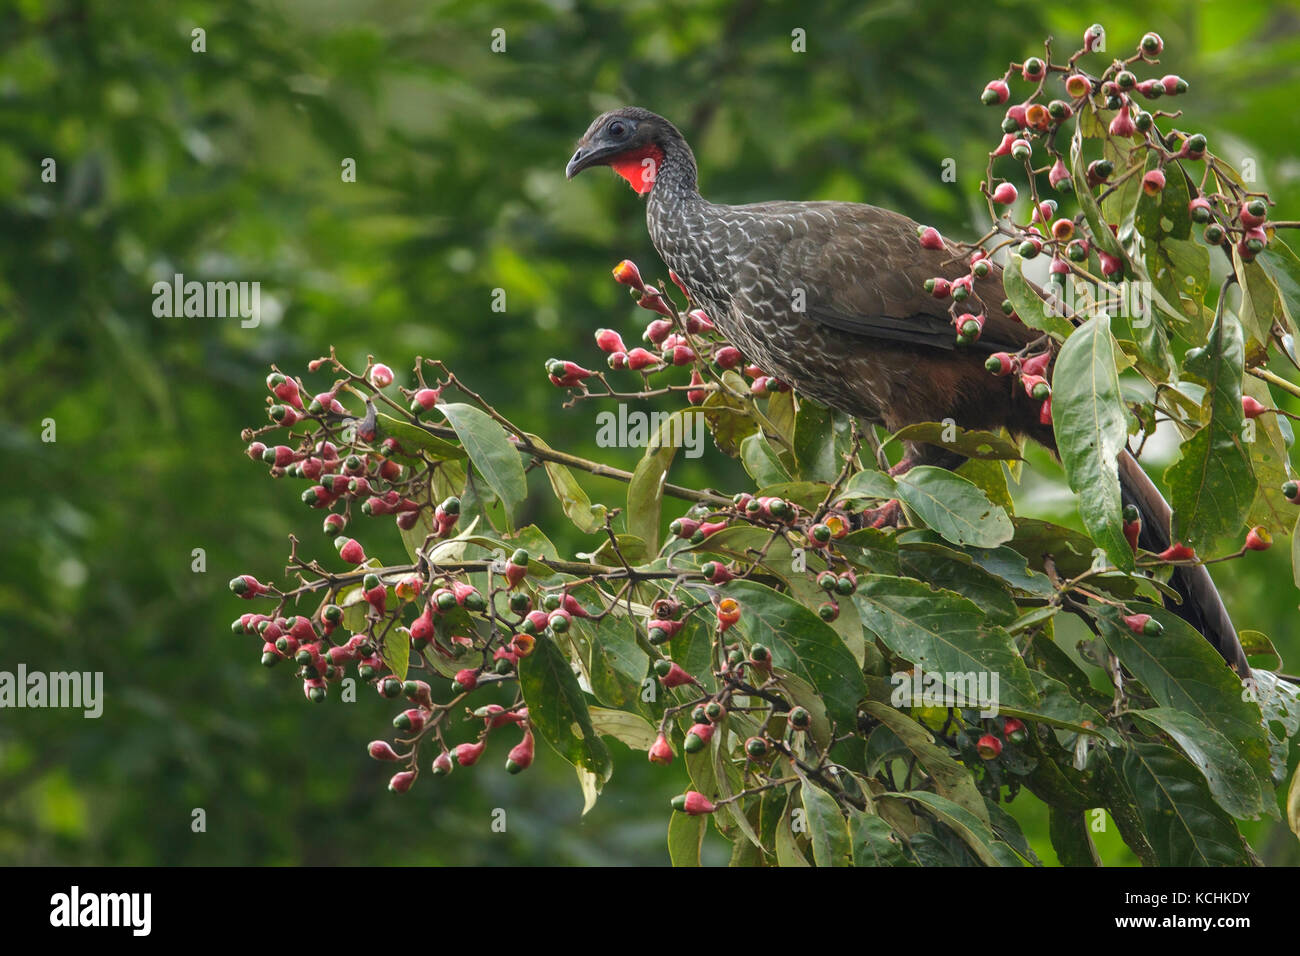 Cauca Guan (Penelope perspicax)  perched on a branch in the mountains of Colombia, South America. Stock Photo